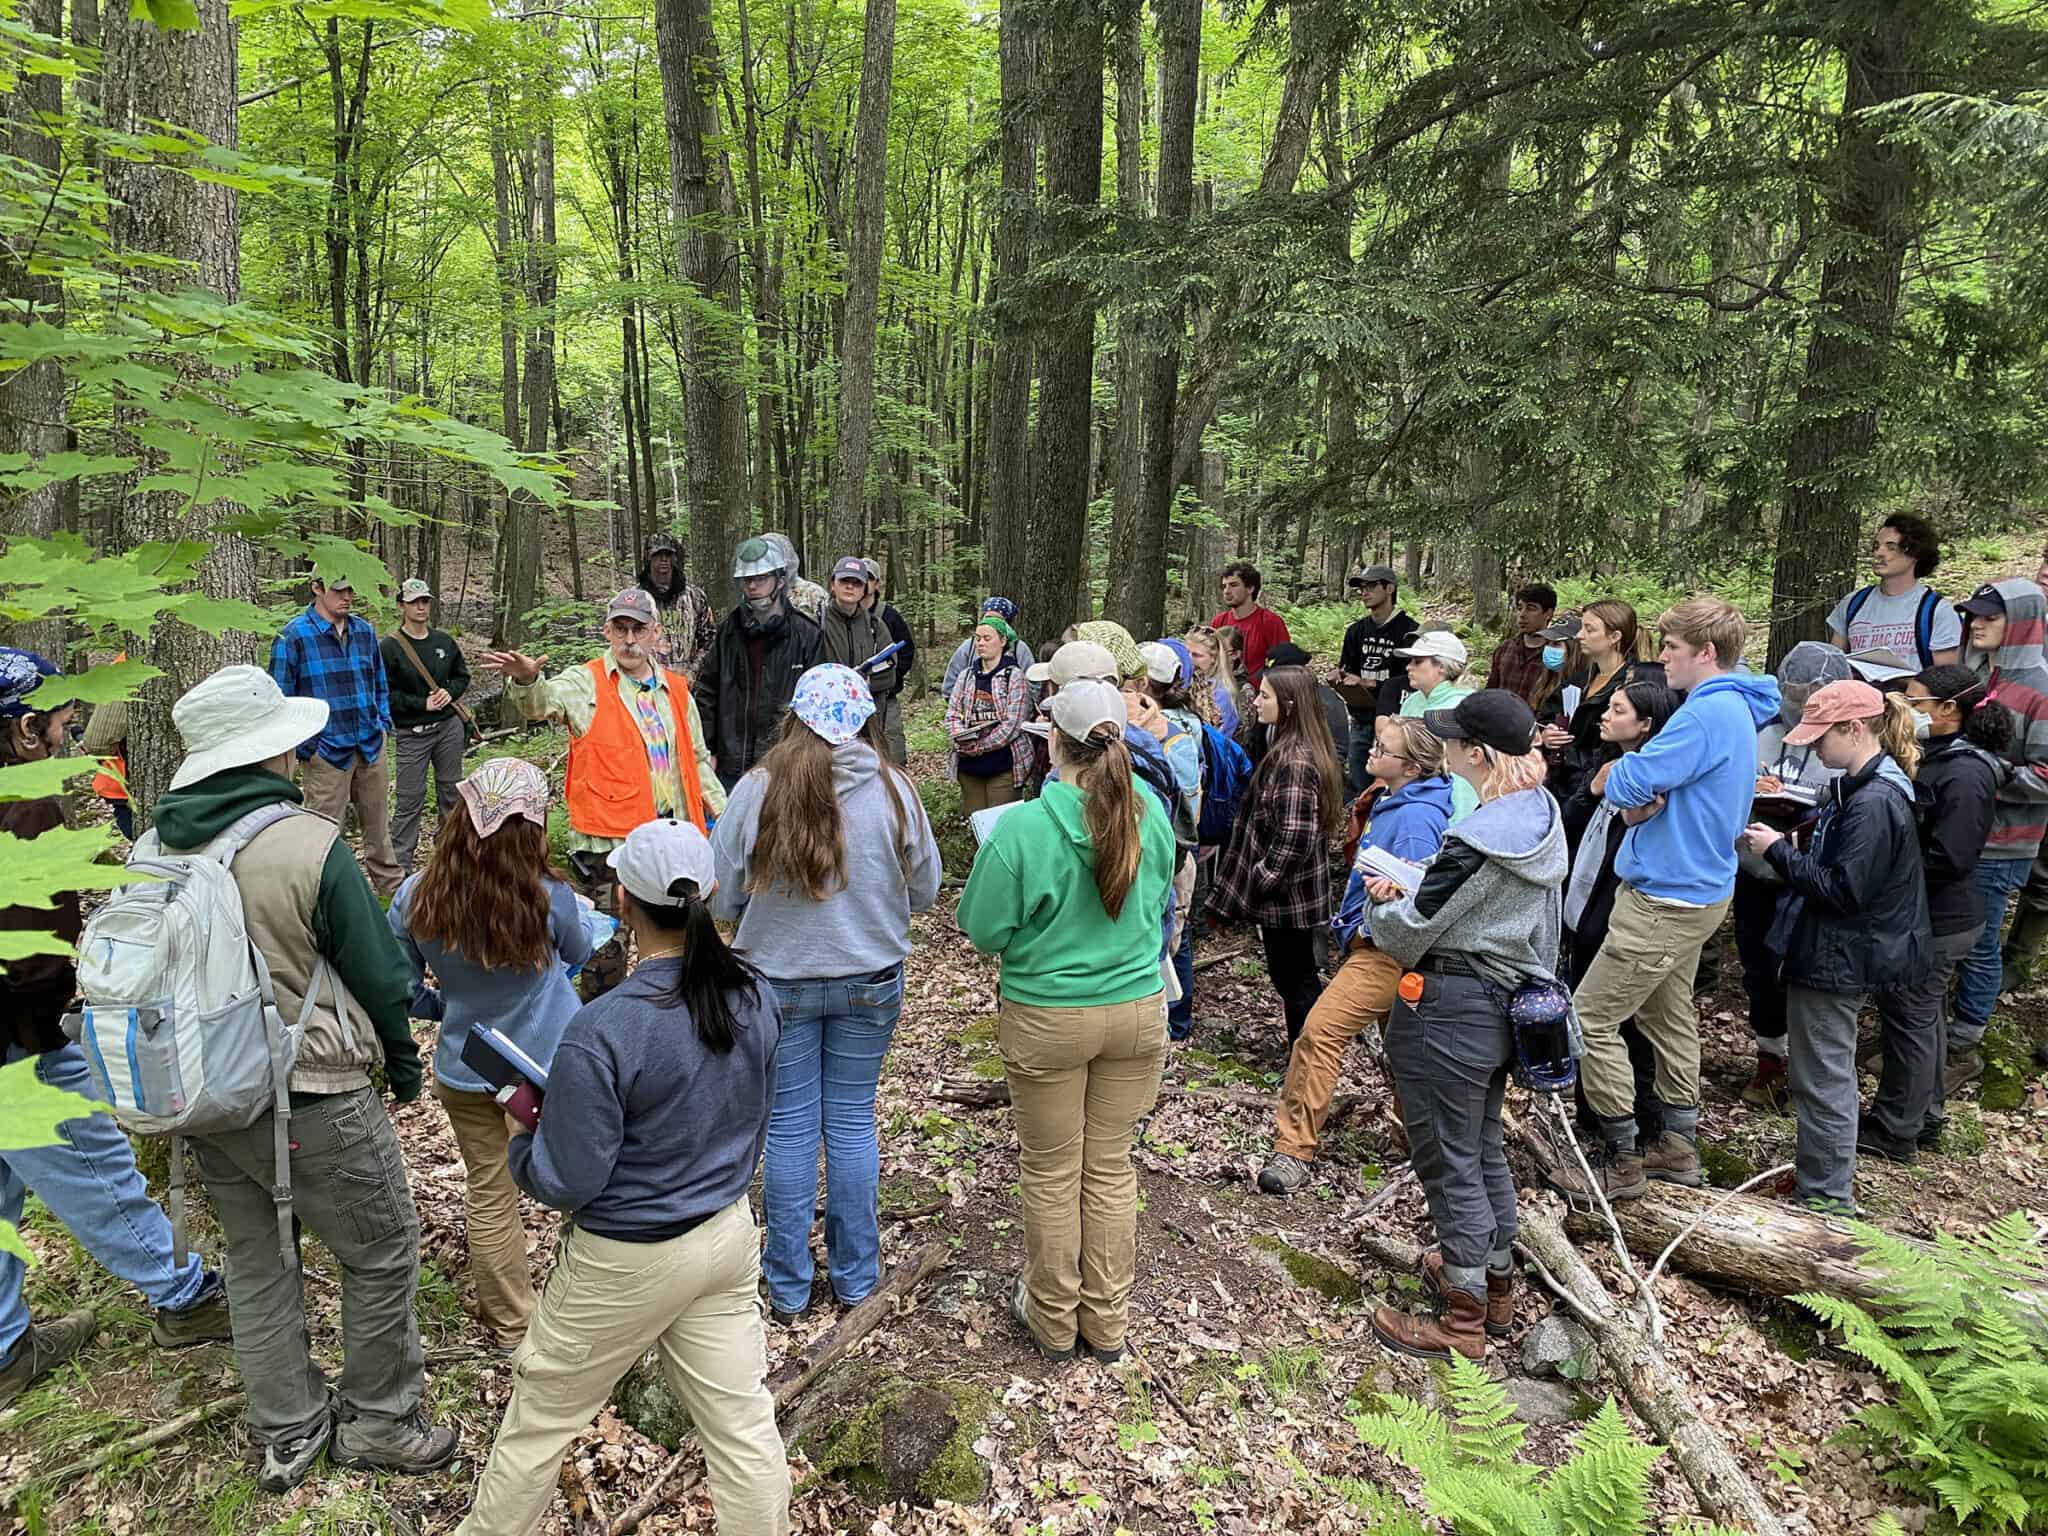 Purdue University Wildlife students visit Nicolet College to learn about northern ecosystems